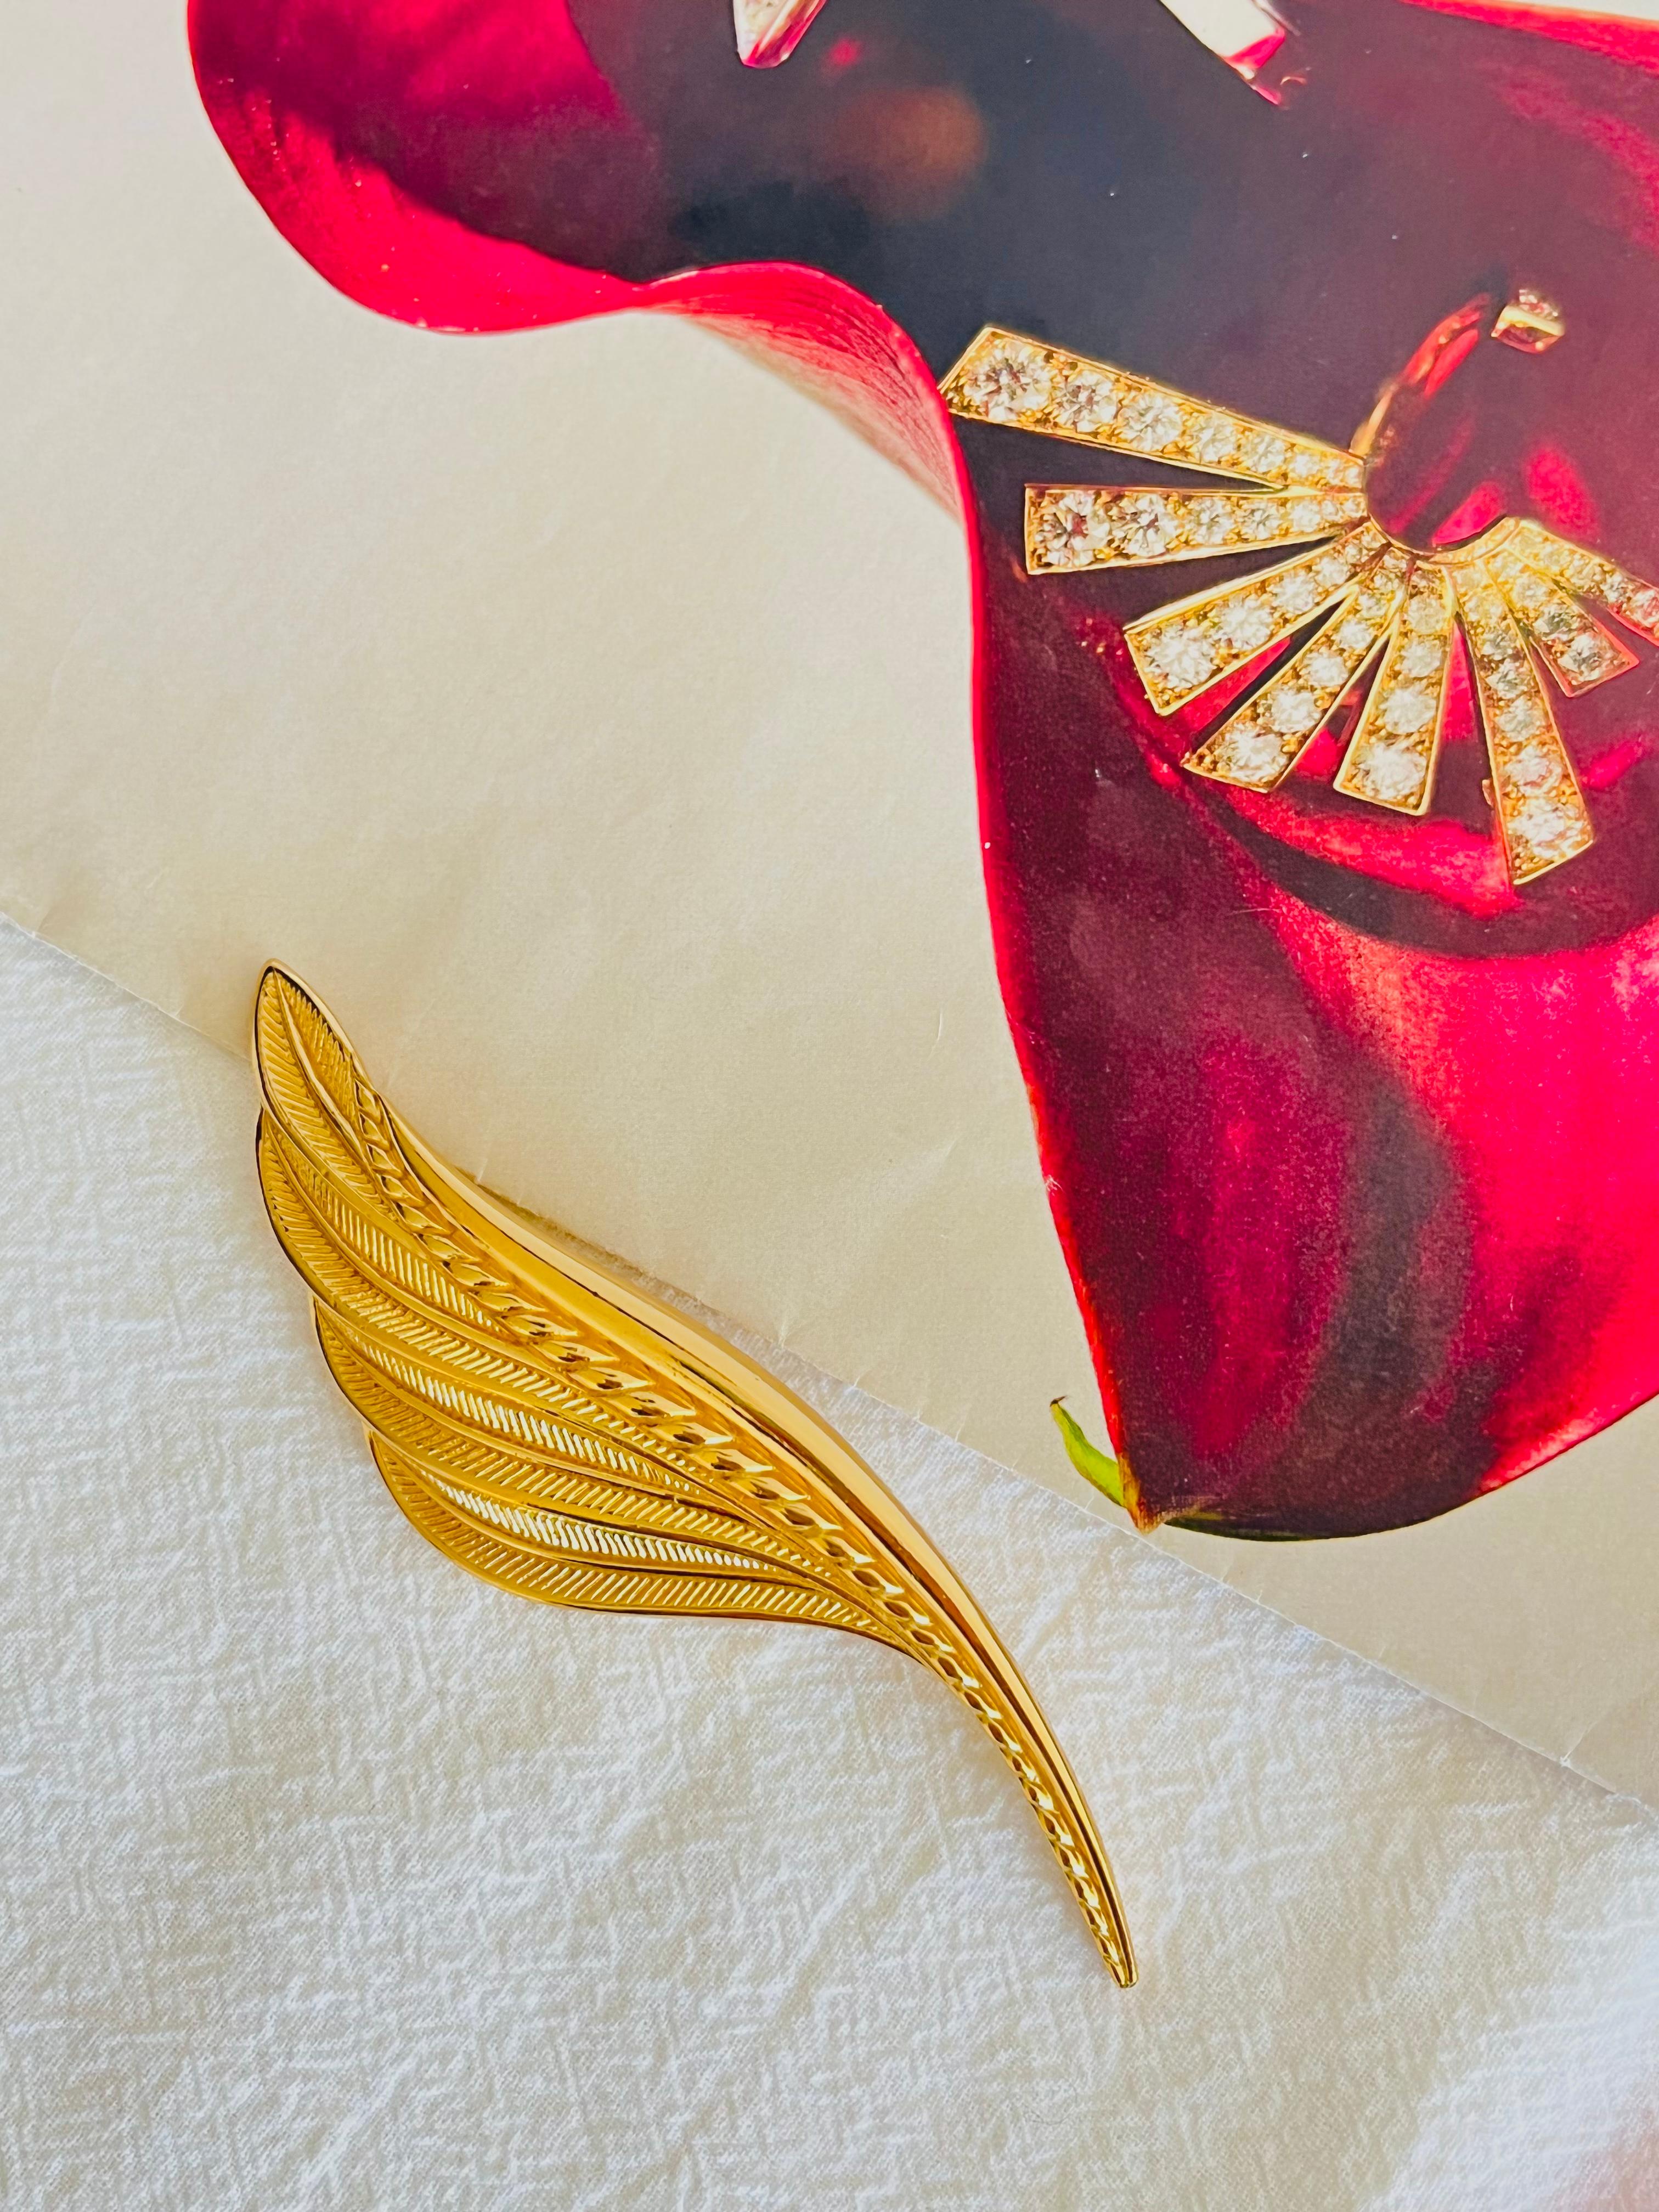 Very good condition. 100% Genuine. Rare to find.

A unique piece. This gold plated stylised brooch. Safety-catch pin closure, signed on the back.

Size: 10.0 cm x 2.5 cm.

Weight: 26.0 g.

_ _ _

Great for everyday wear. Come with velvet pouch and